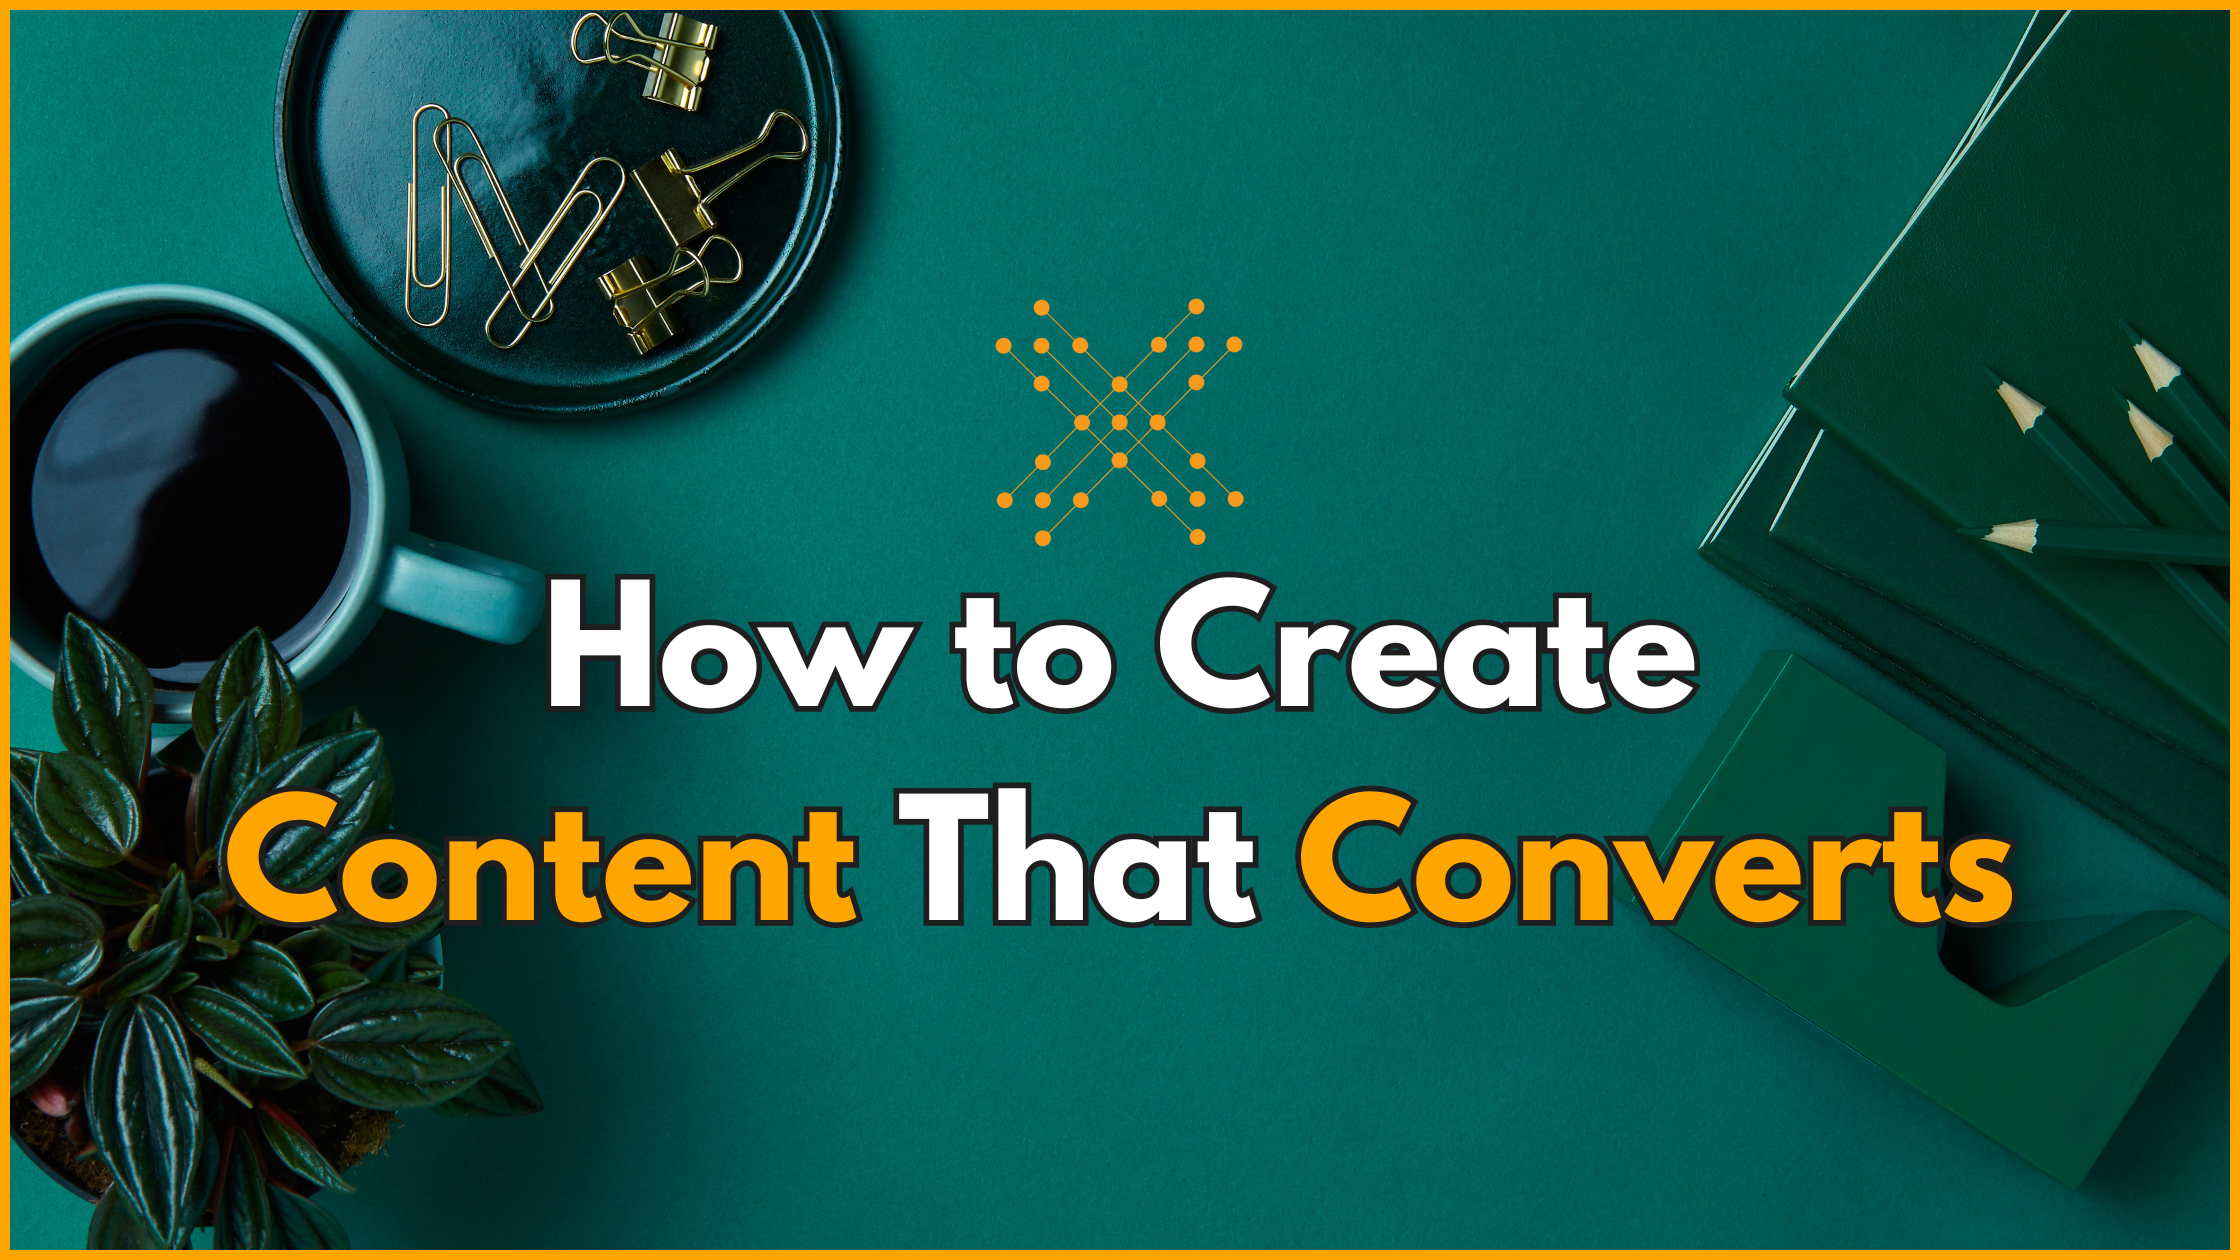 How to Create Content That Converts